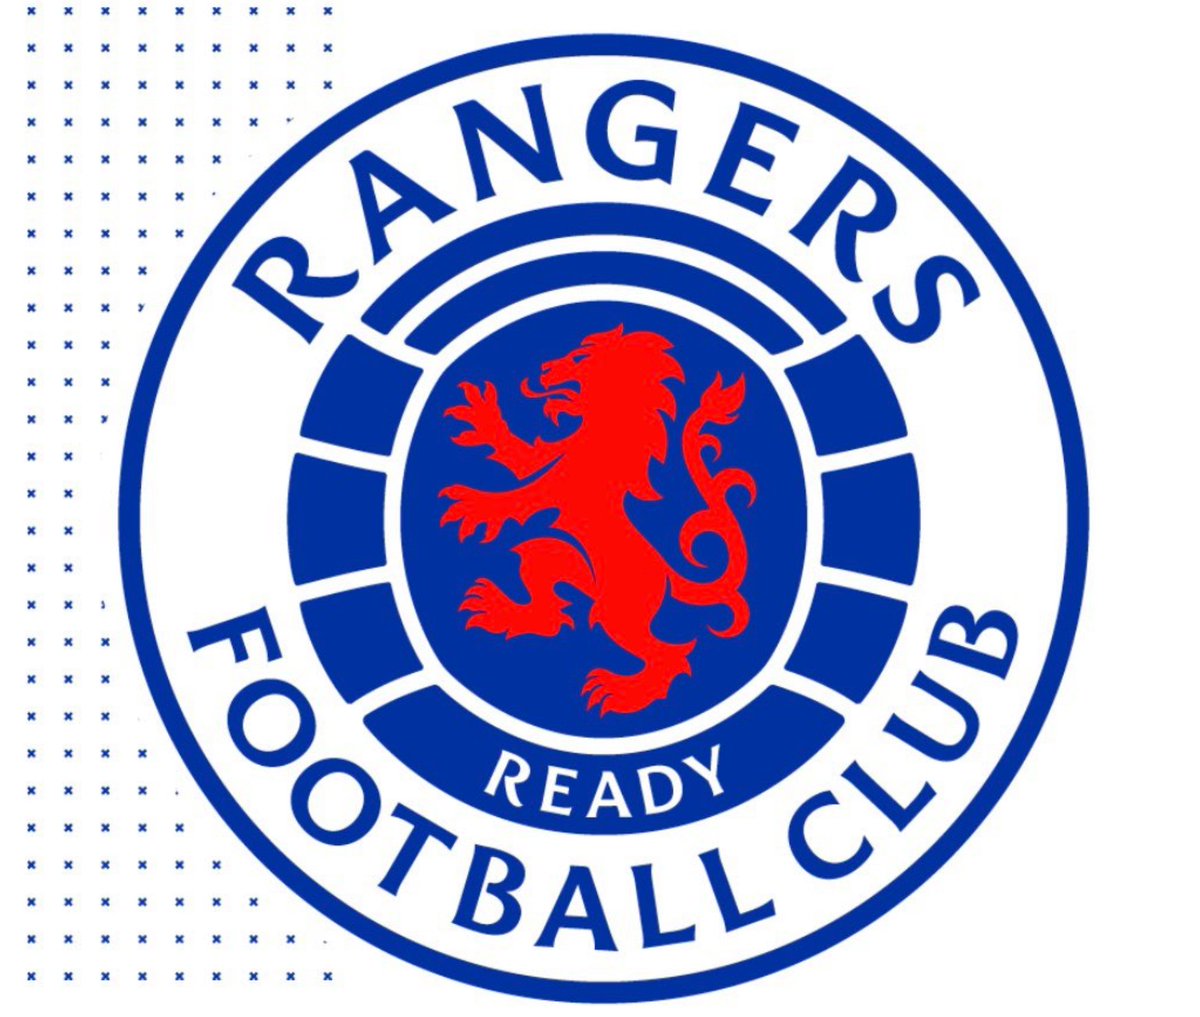 I love this new design, shows that rangers are moving back up